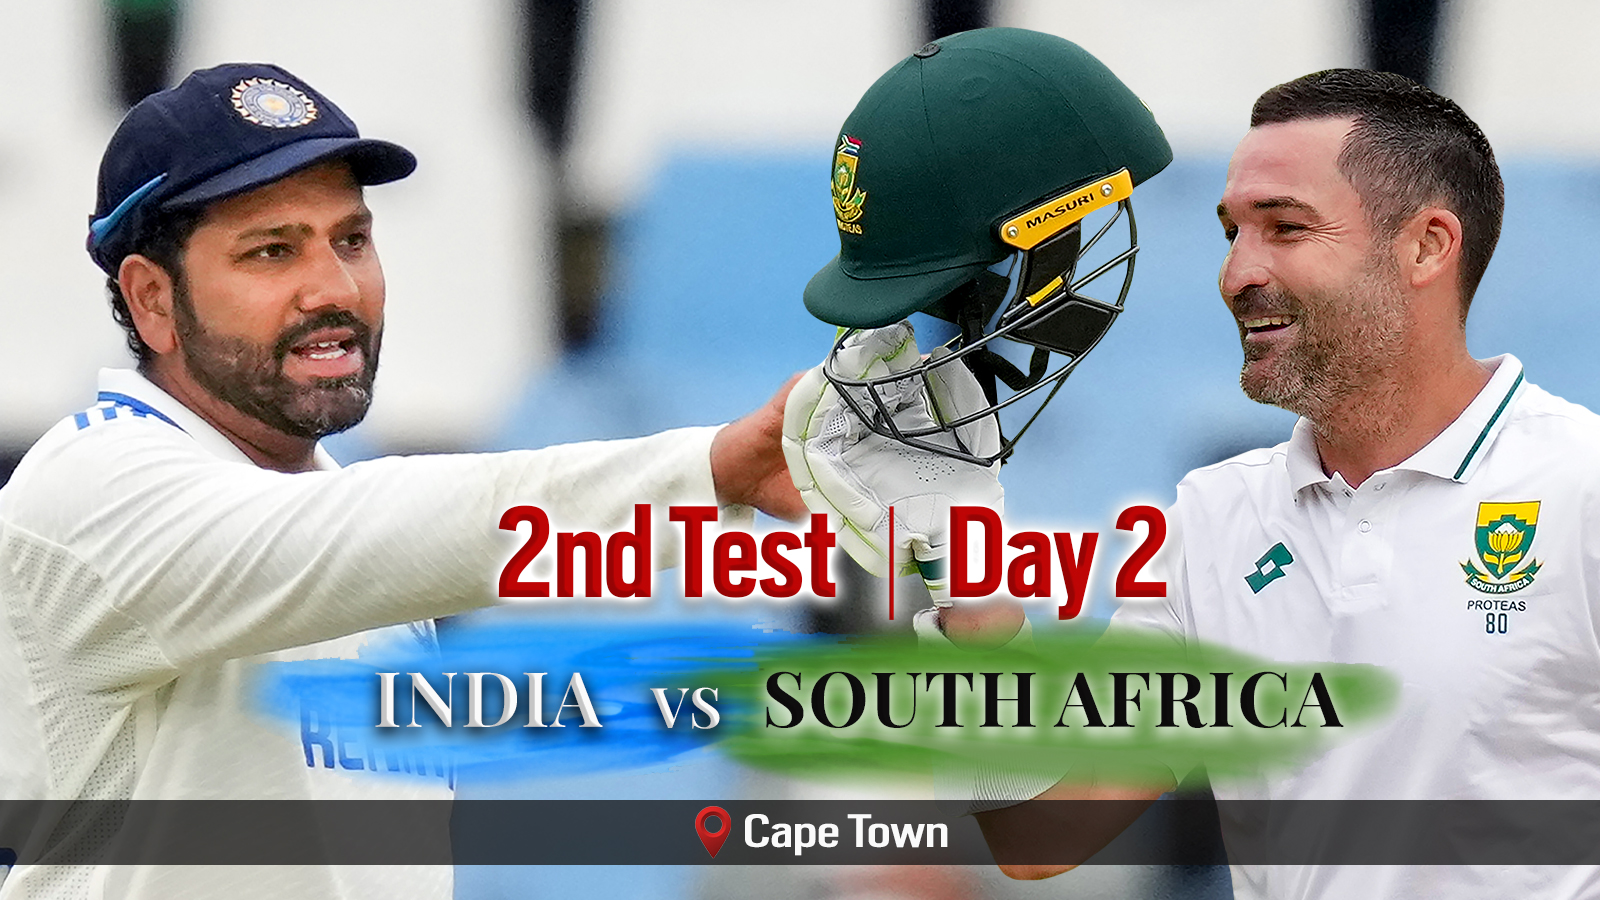 India vs South Africa Live Score, 2nd Test Day 2 Jasprit Bumrah’s 6